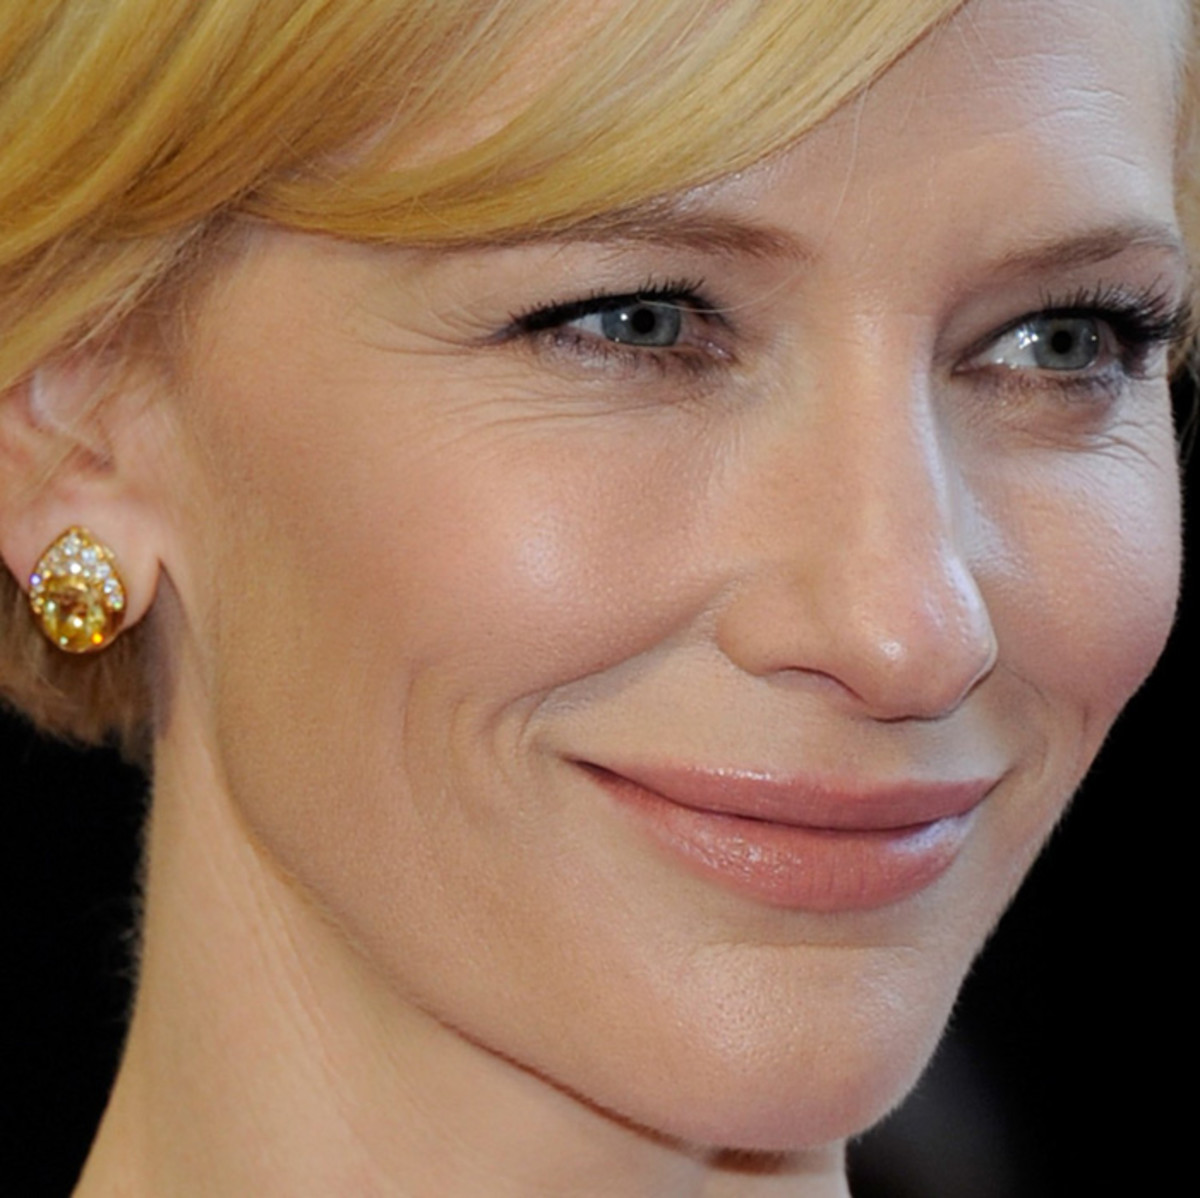 Cate Blanchett on the red carpet at the 2011 Academy Awards, no re-touching